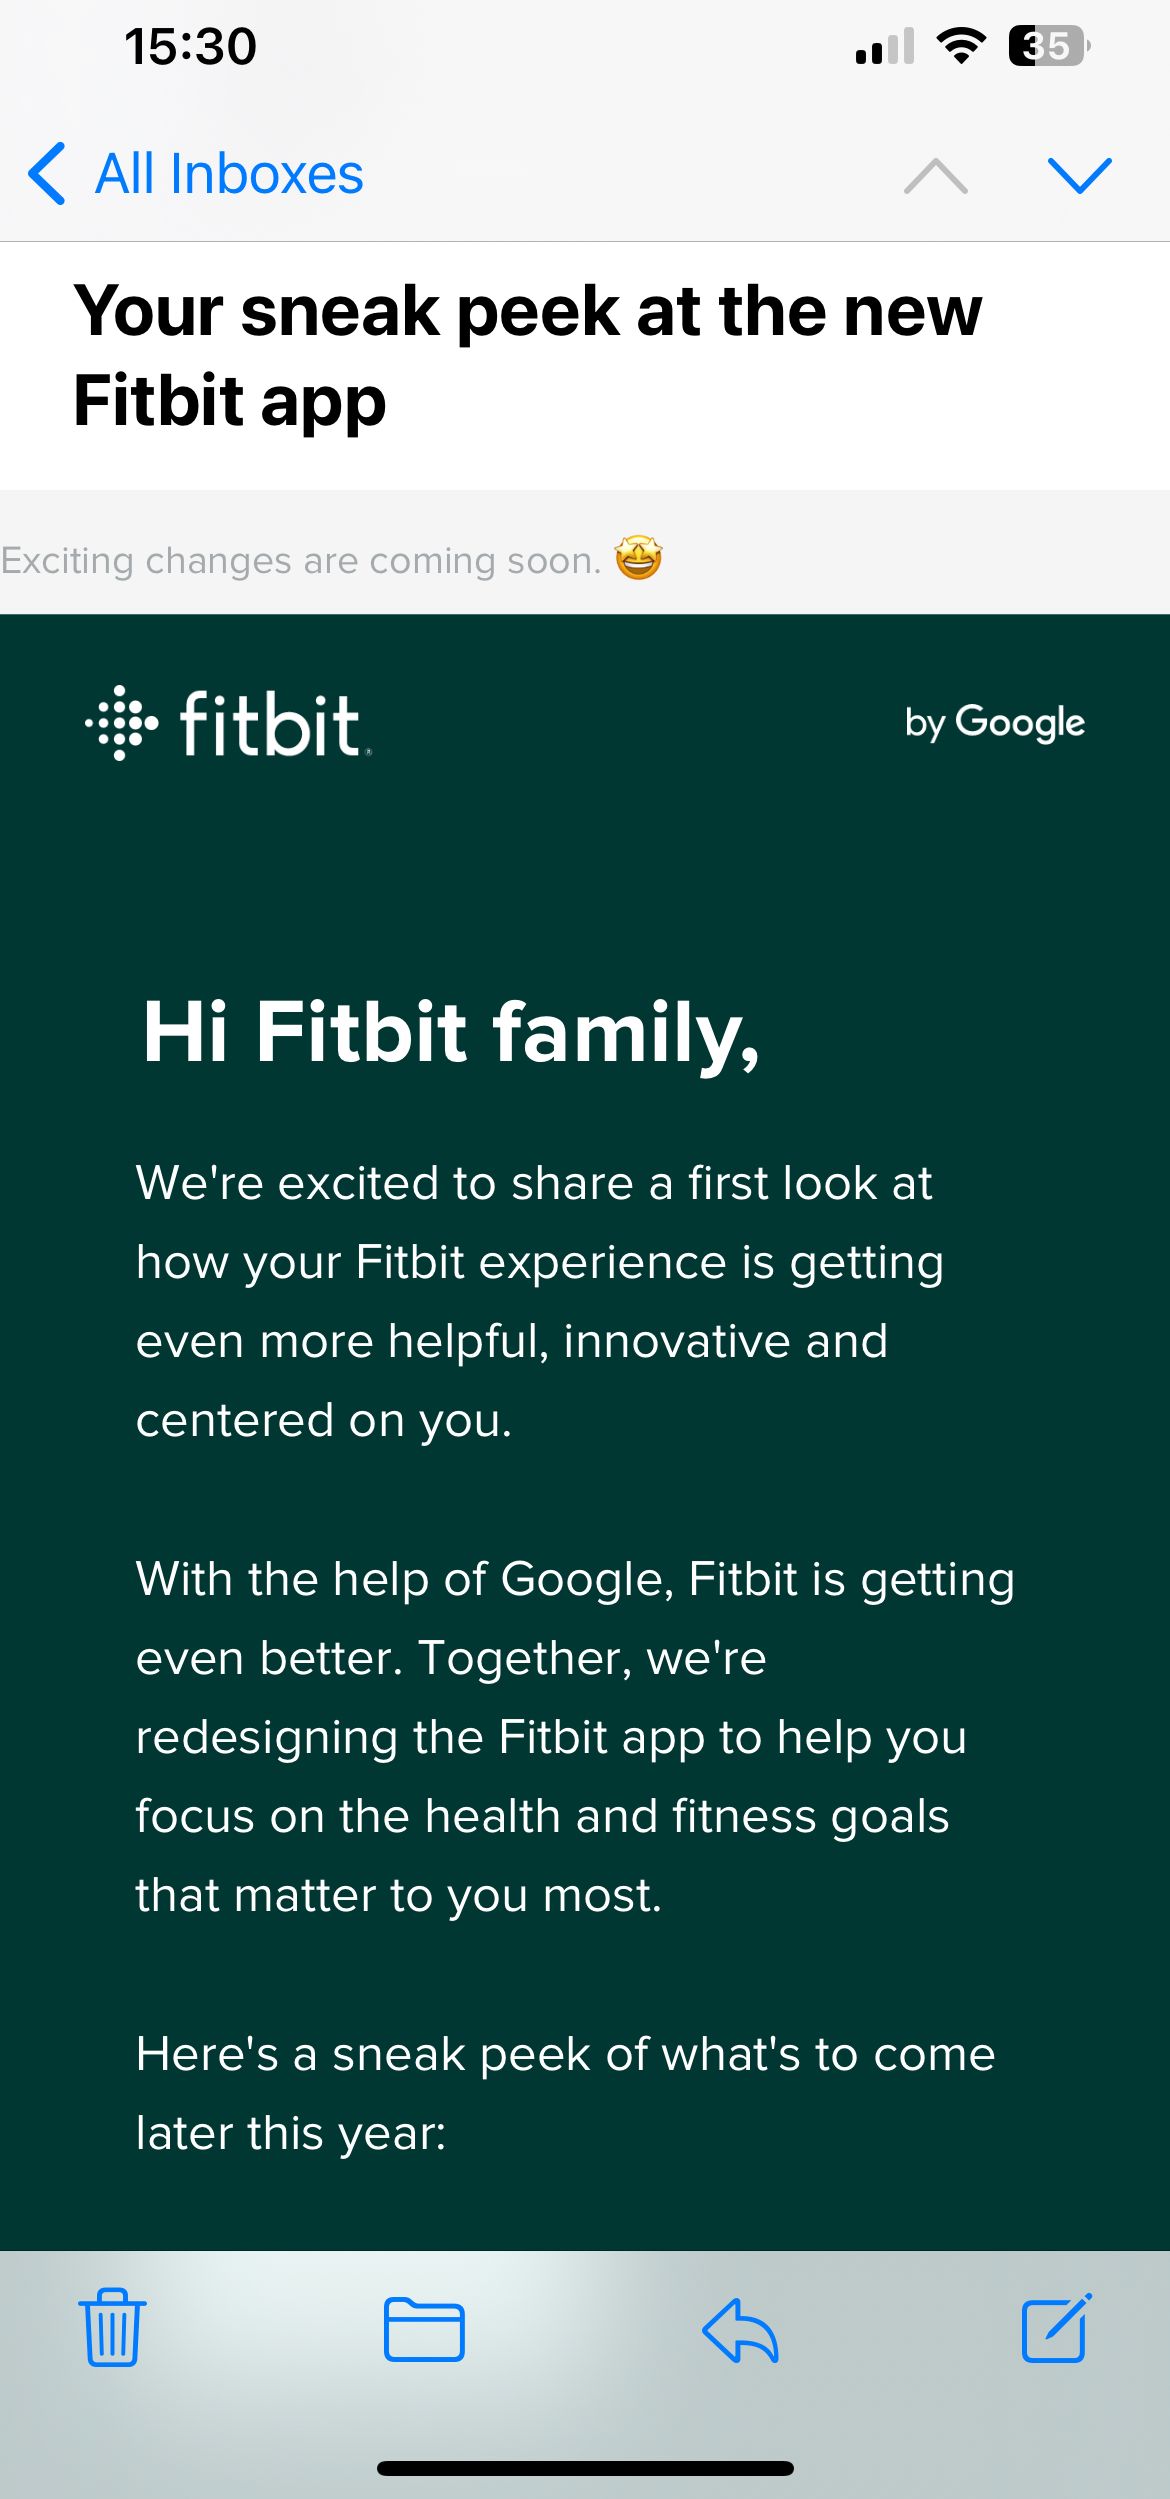 Solved: RESOLVED: Aria Air won't sync - Fitbit Community